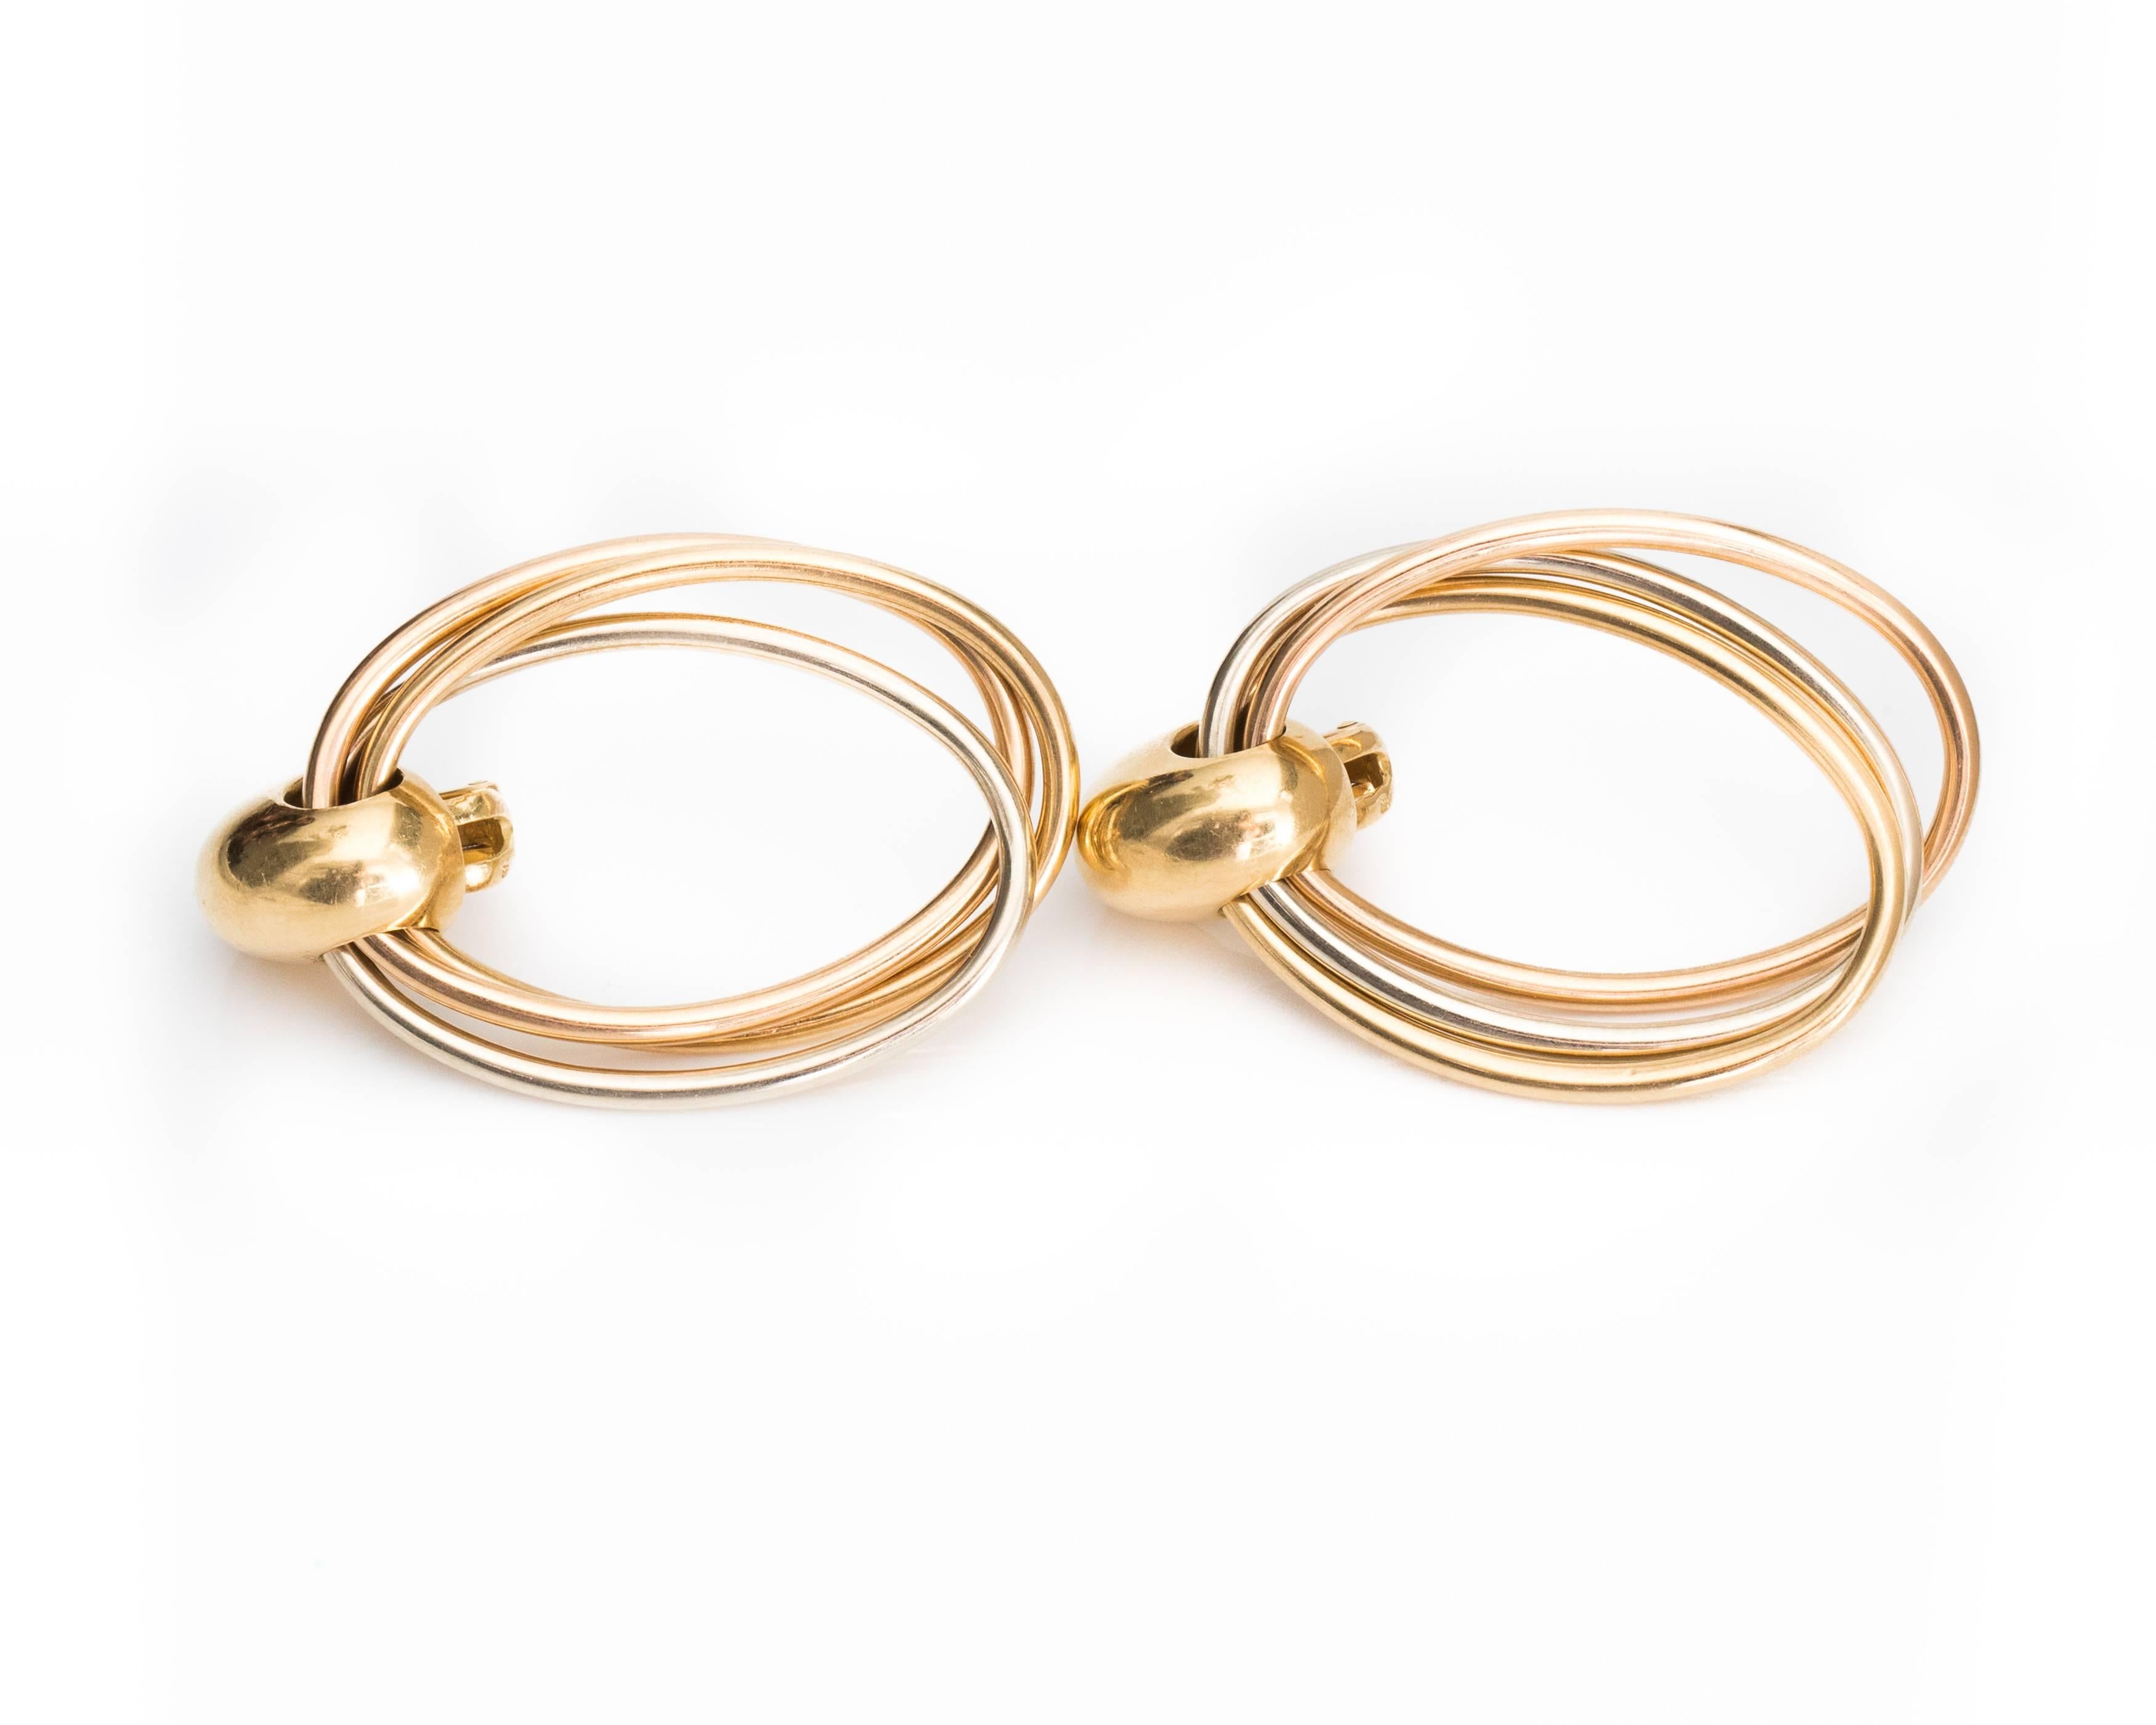 These Cartier Tricolor Earrings are an Everyday Classic! Each earring features a tricolor interlocking 18 Karat White, Yellow and Rose Gold hoop suspended from a bombe gold top. These gorgeous earrings are 1.75 inches long and have Posts with Omega